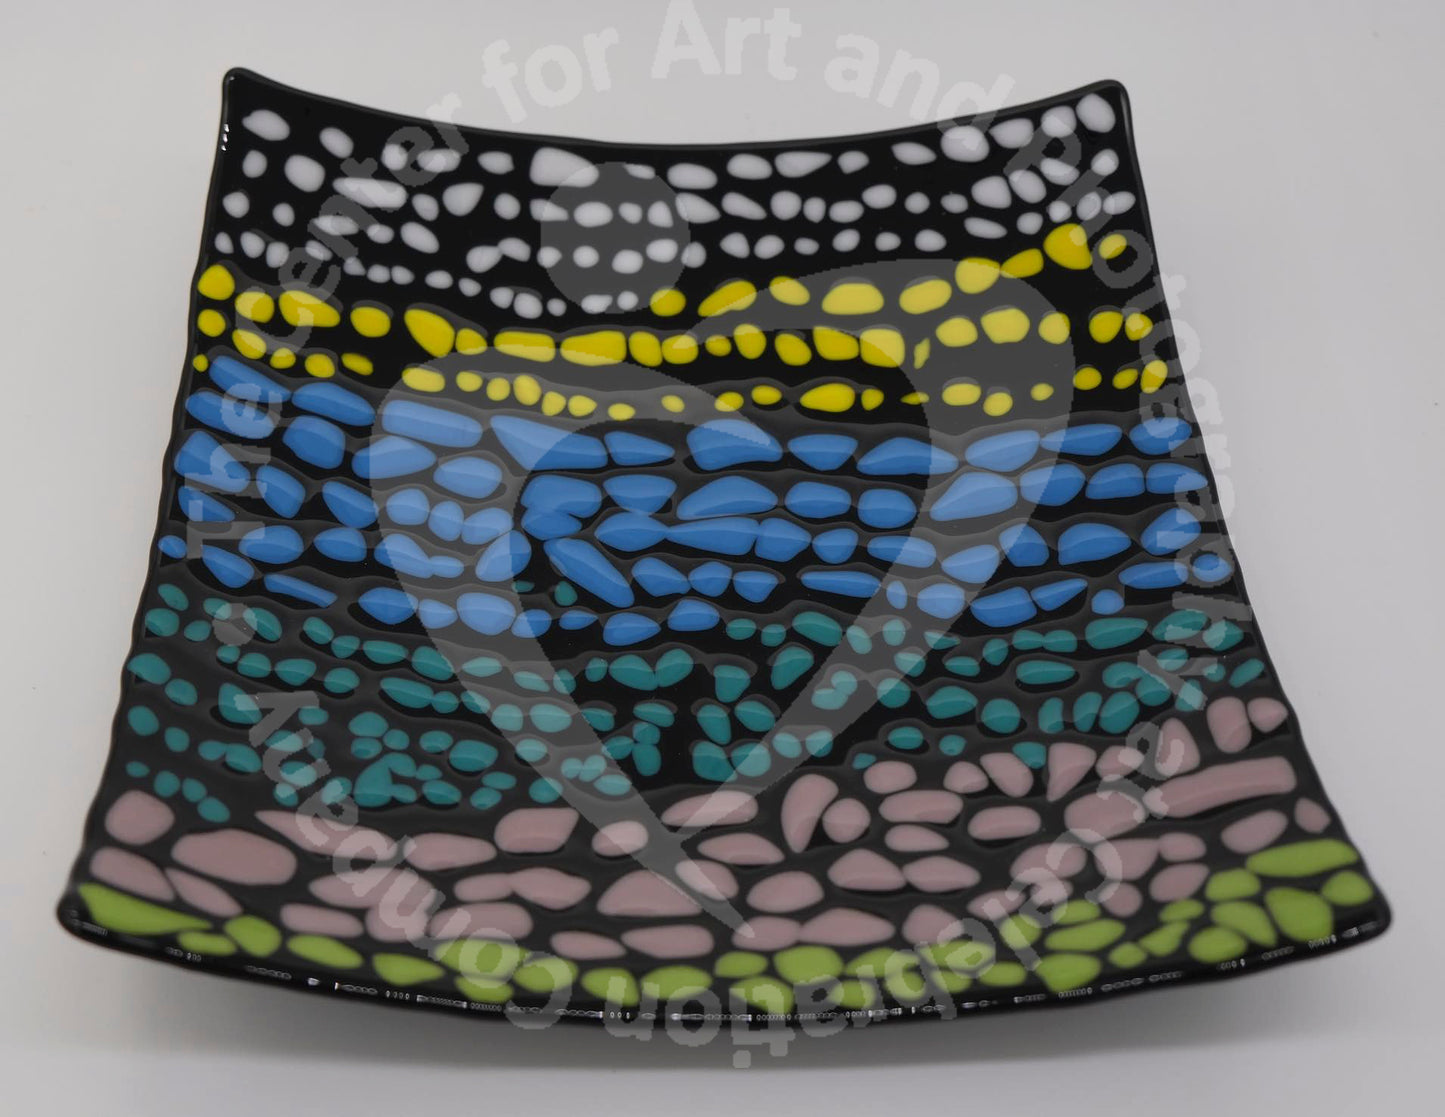 A black square glass curved plate that has small pebbles of colors. There are on average of three rows each color before transitioning to the next color. Colored pebbles are placed in the following order: white, yellow, blue, turquoise, light purple, and green.